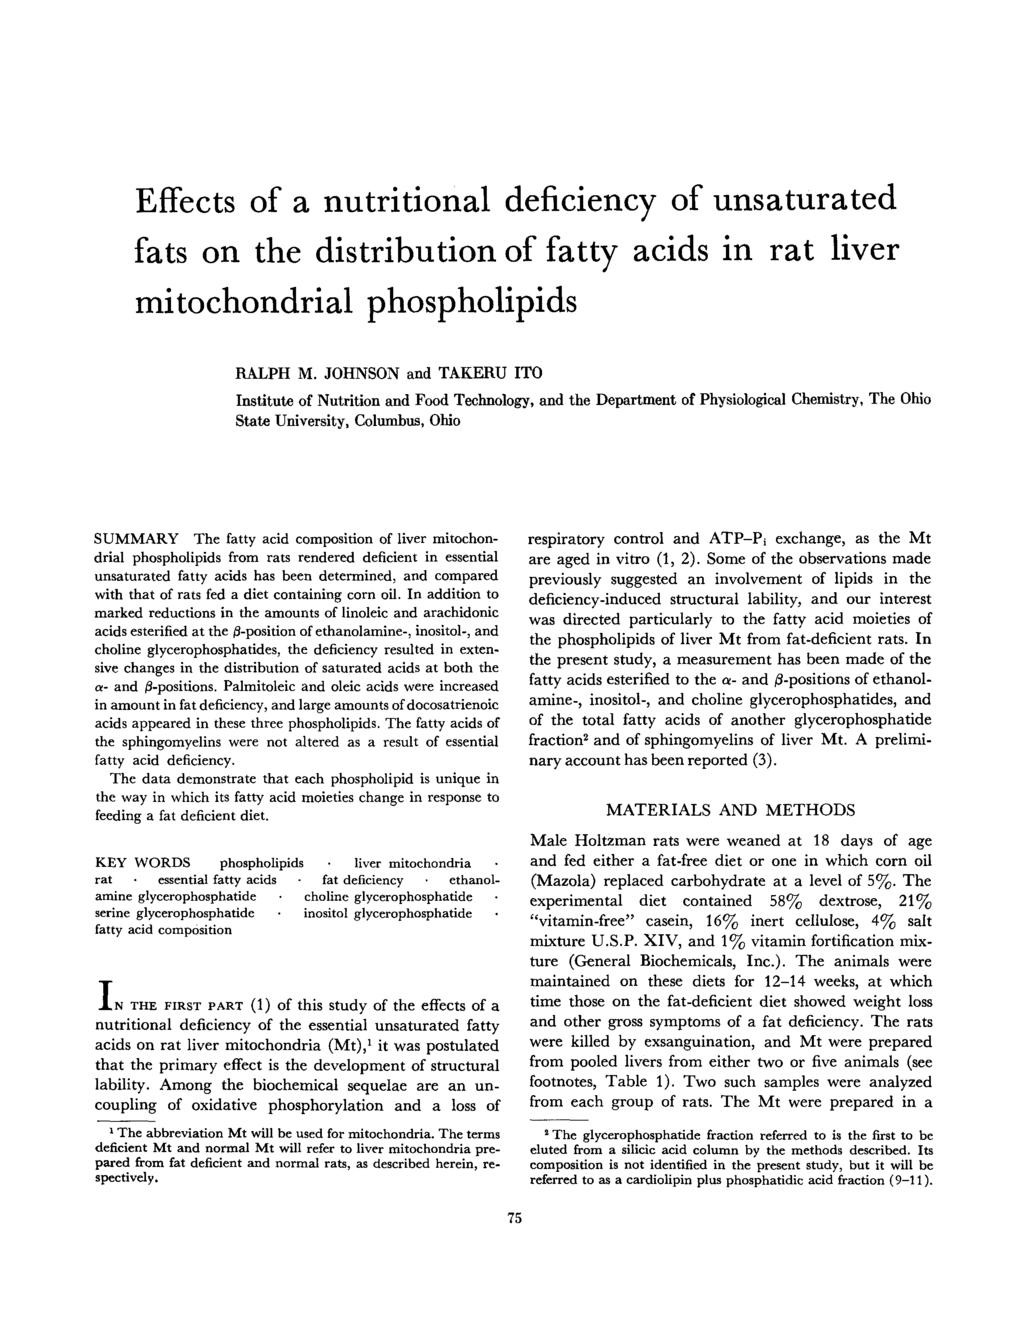 Effects of a nutritional deficiency of unsaturated fats on the distributionof fatty acids in rat liver mitochondrial phospholipids RALPH M.